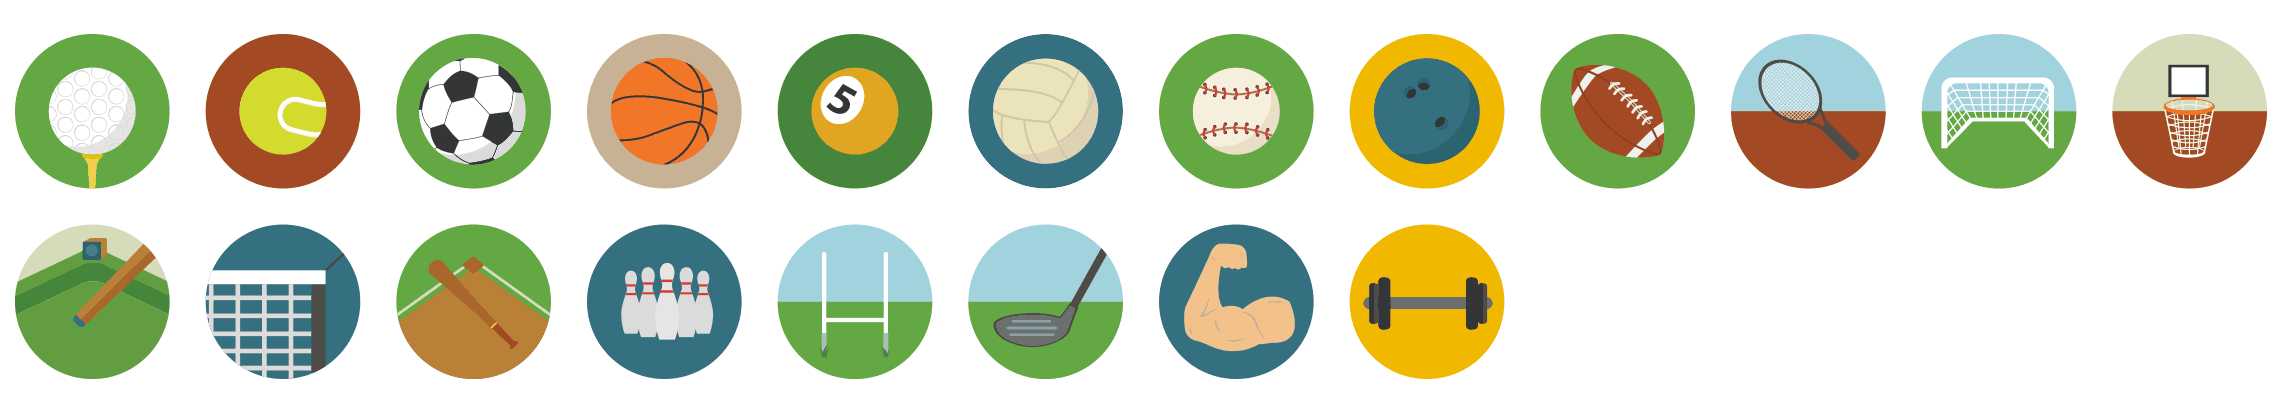 sports-flat-icons-vol-1-preview